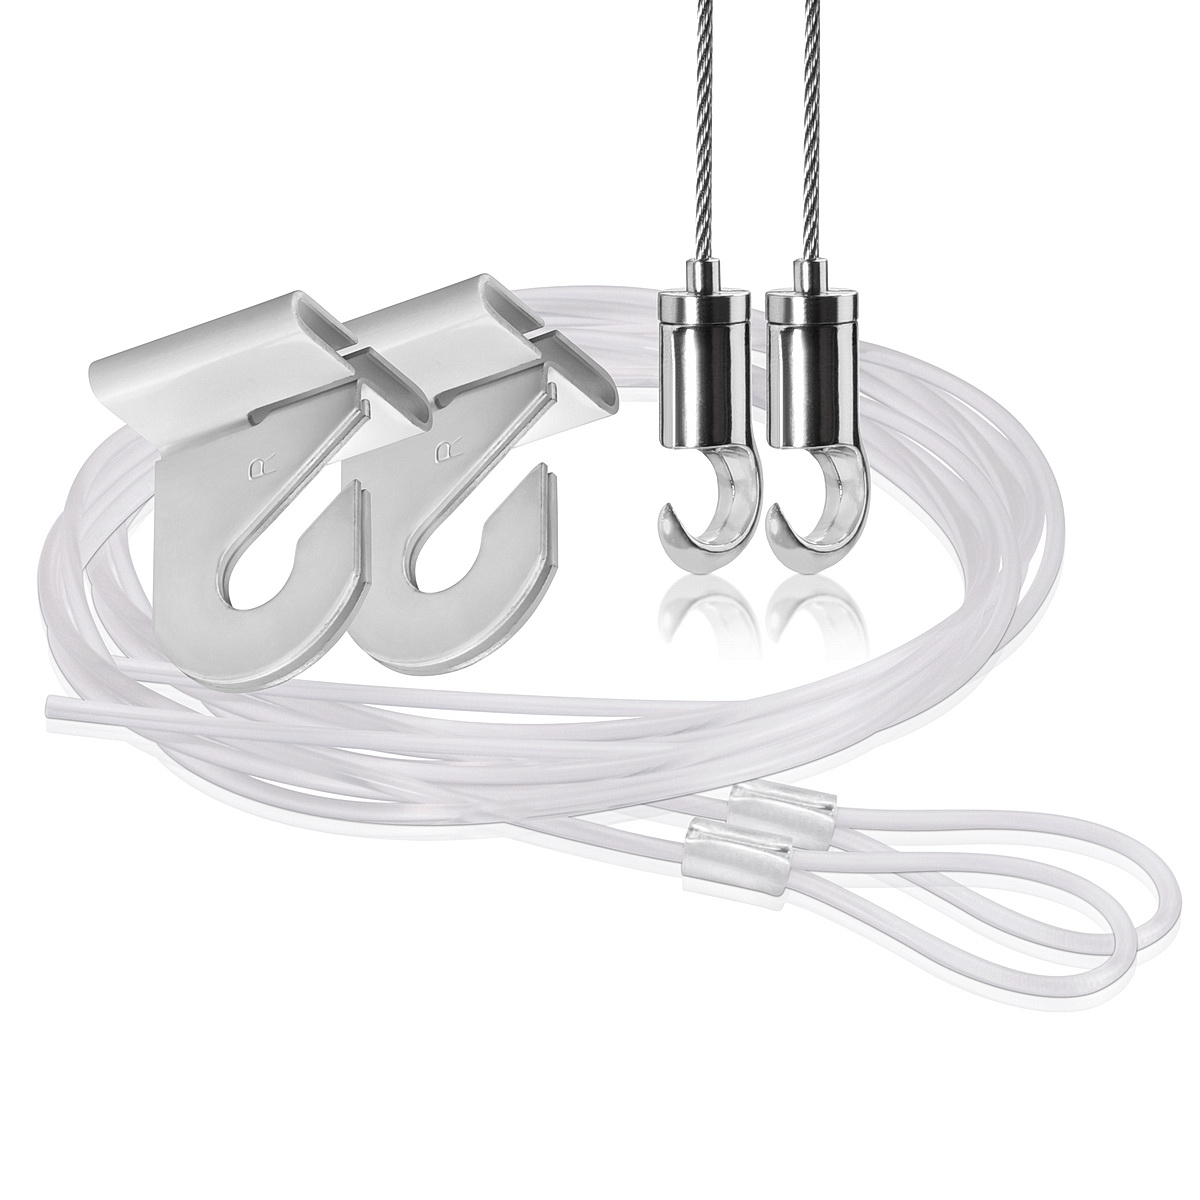 Suspended Kit, T Clamp, Looped Nylon Cable - 72'', Hook - 1/16'' Diameter Cable